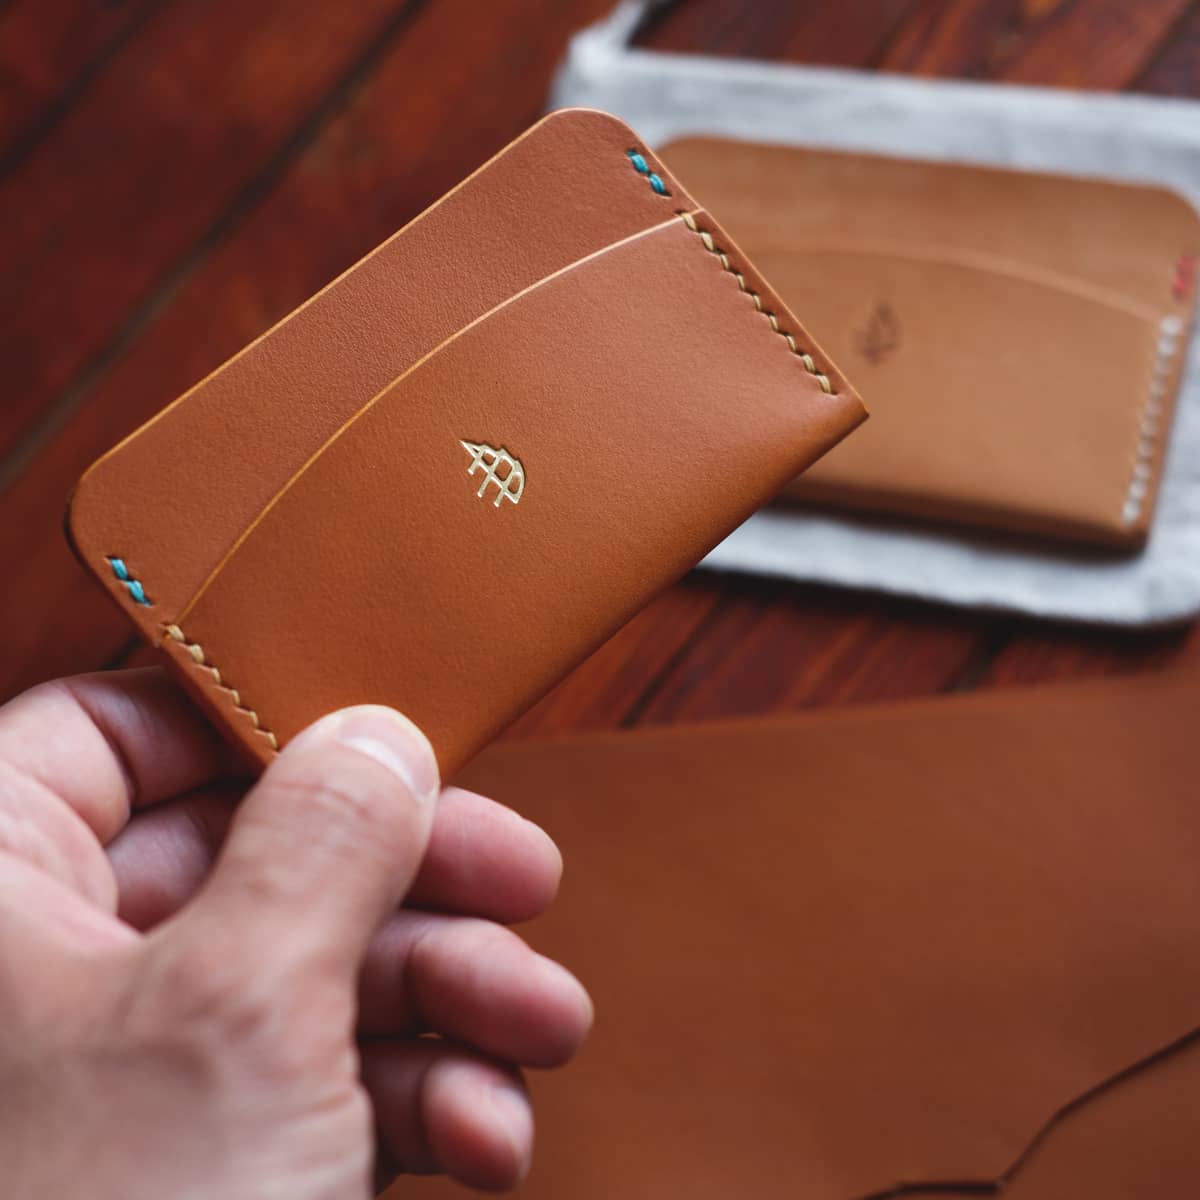 The Mountain Card Holder in light brown aniline vegetable tanned leather held in hand